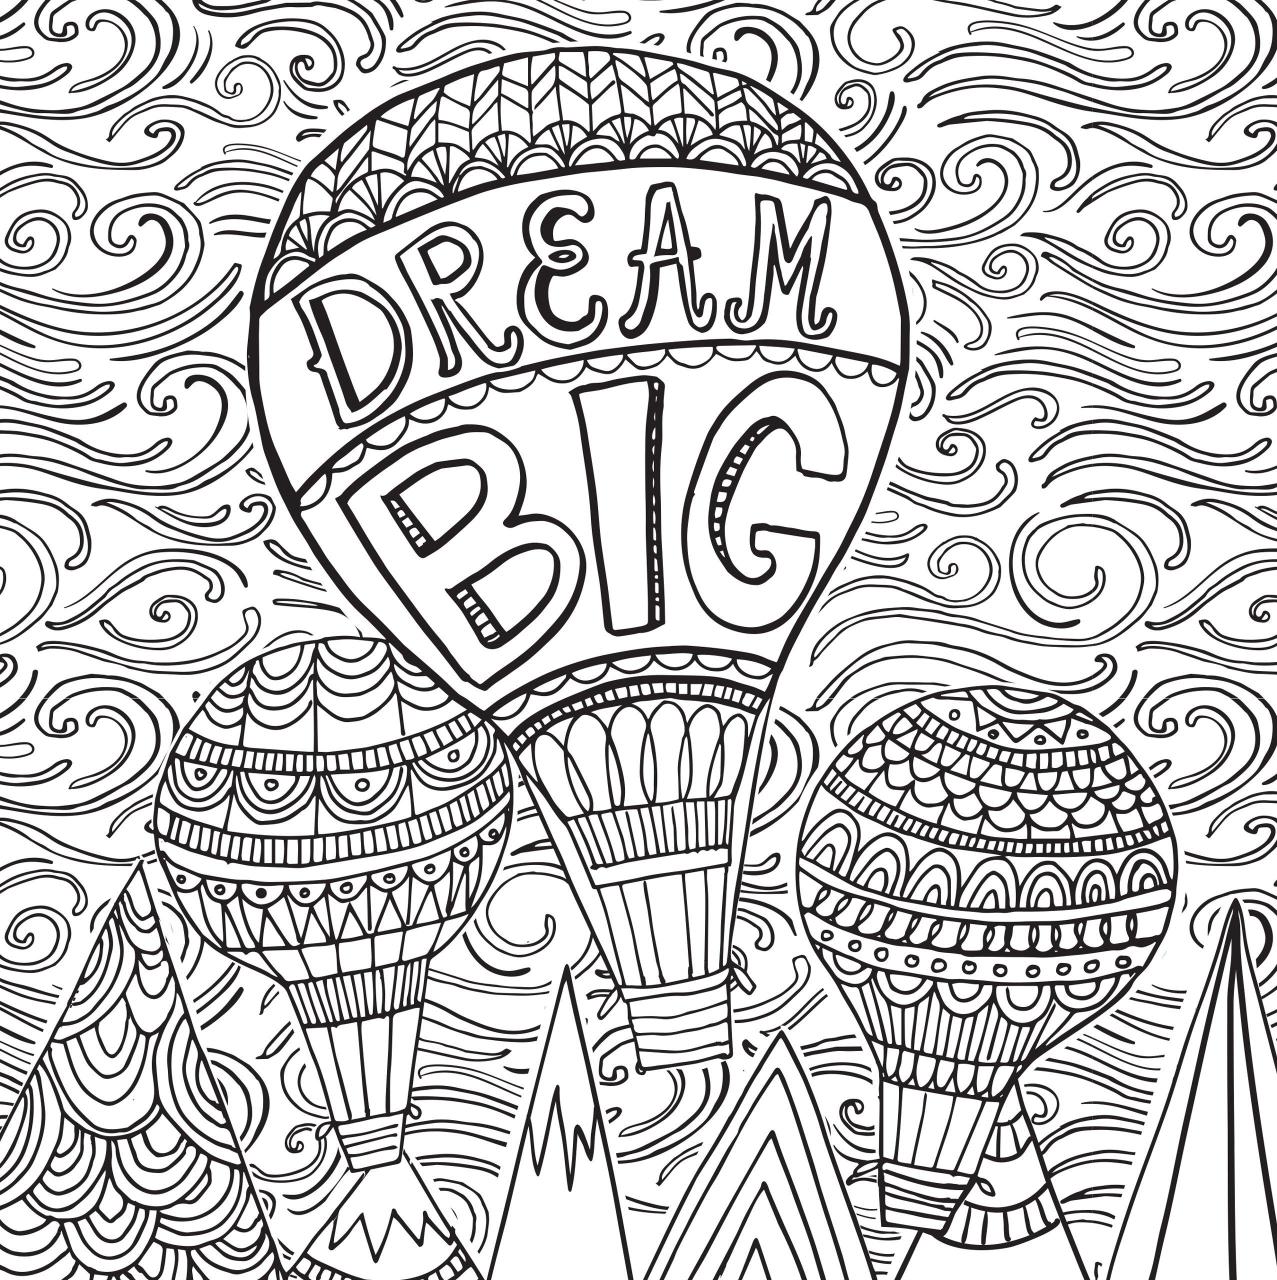 Stress Relief Coloring Pages